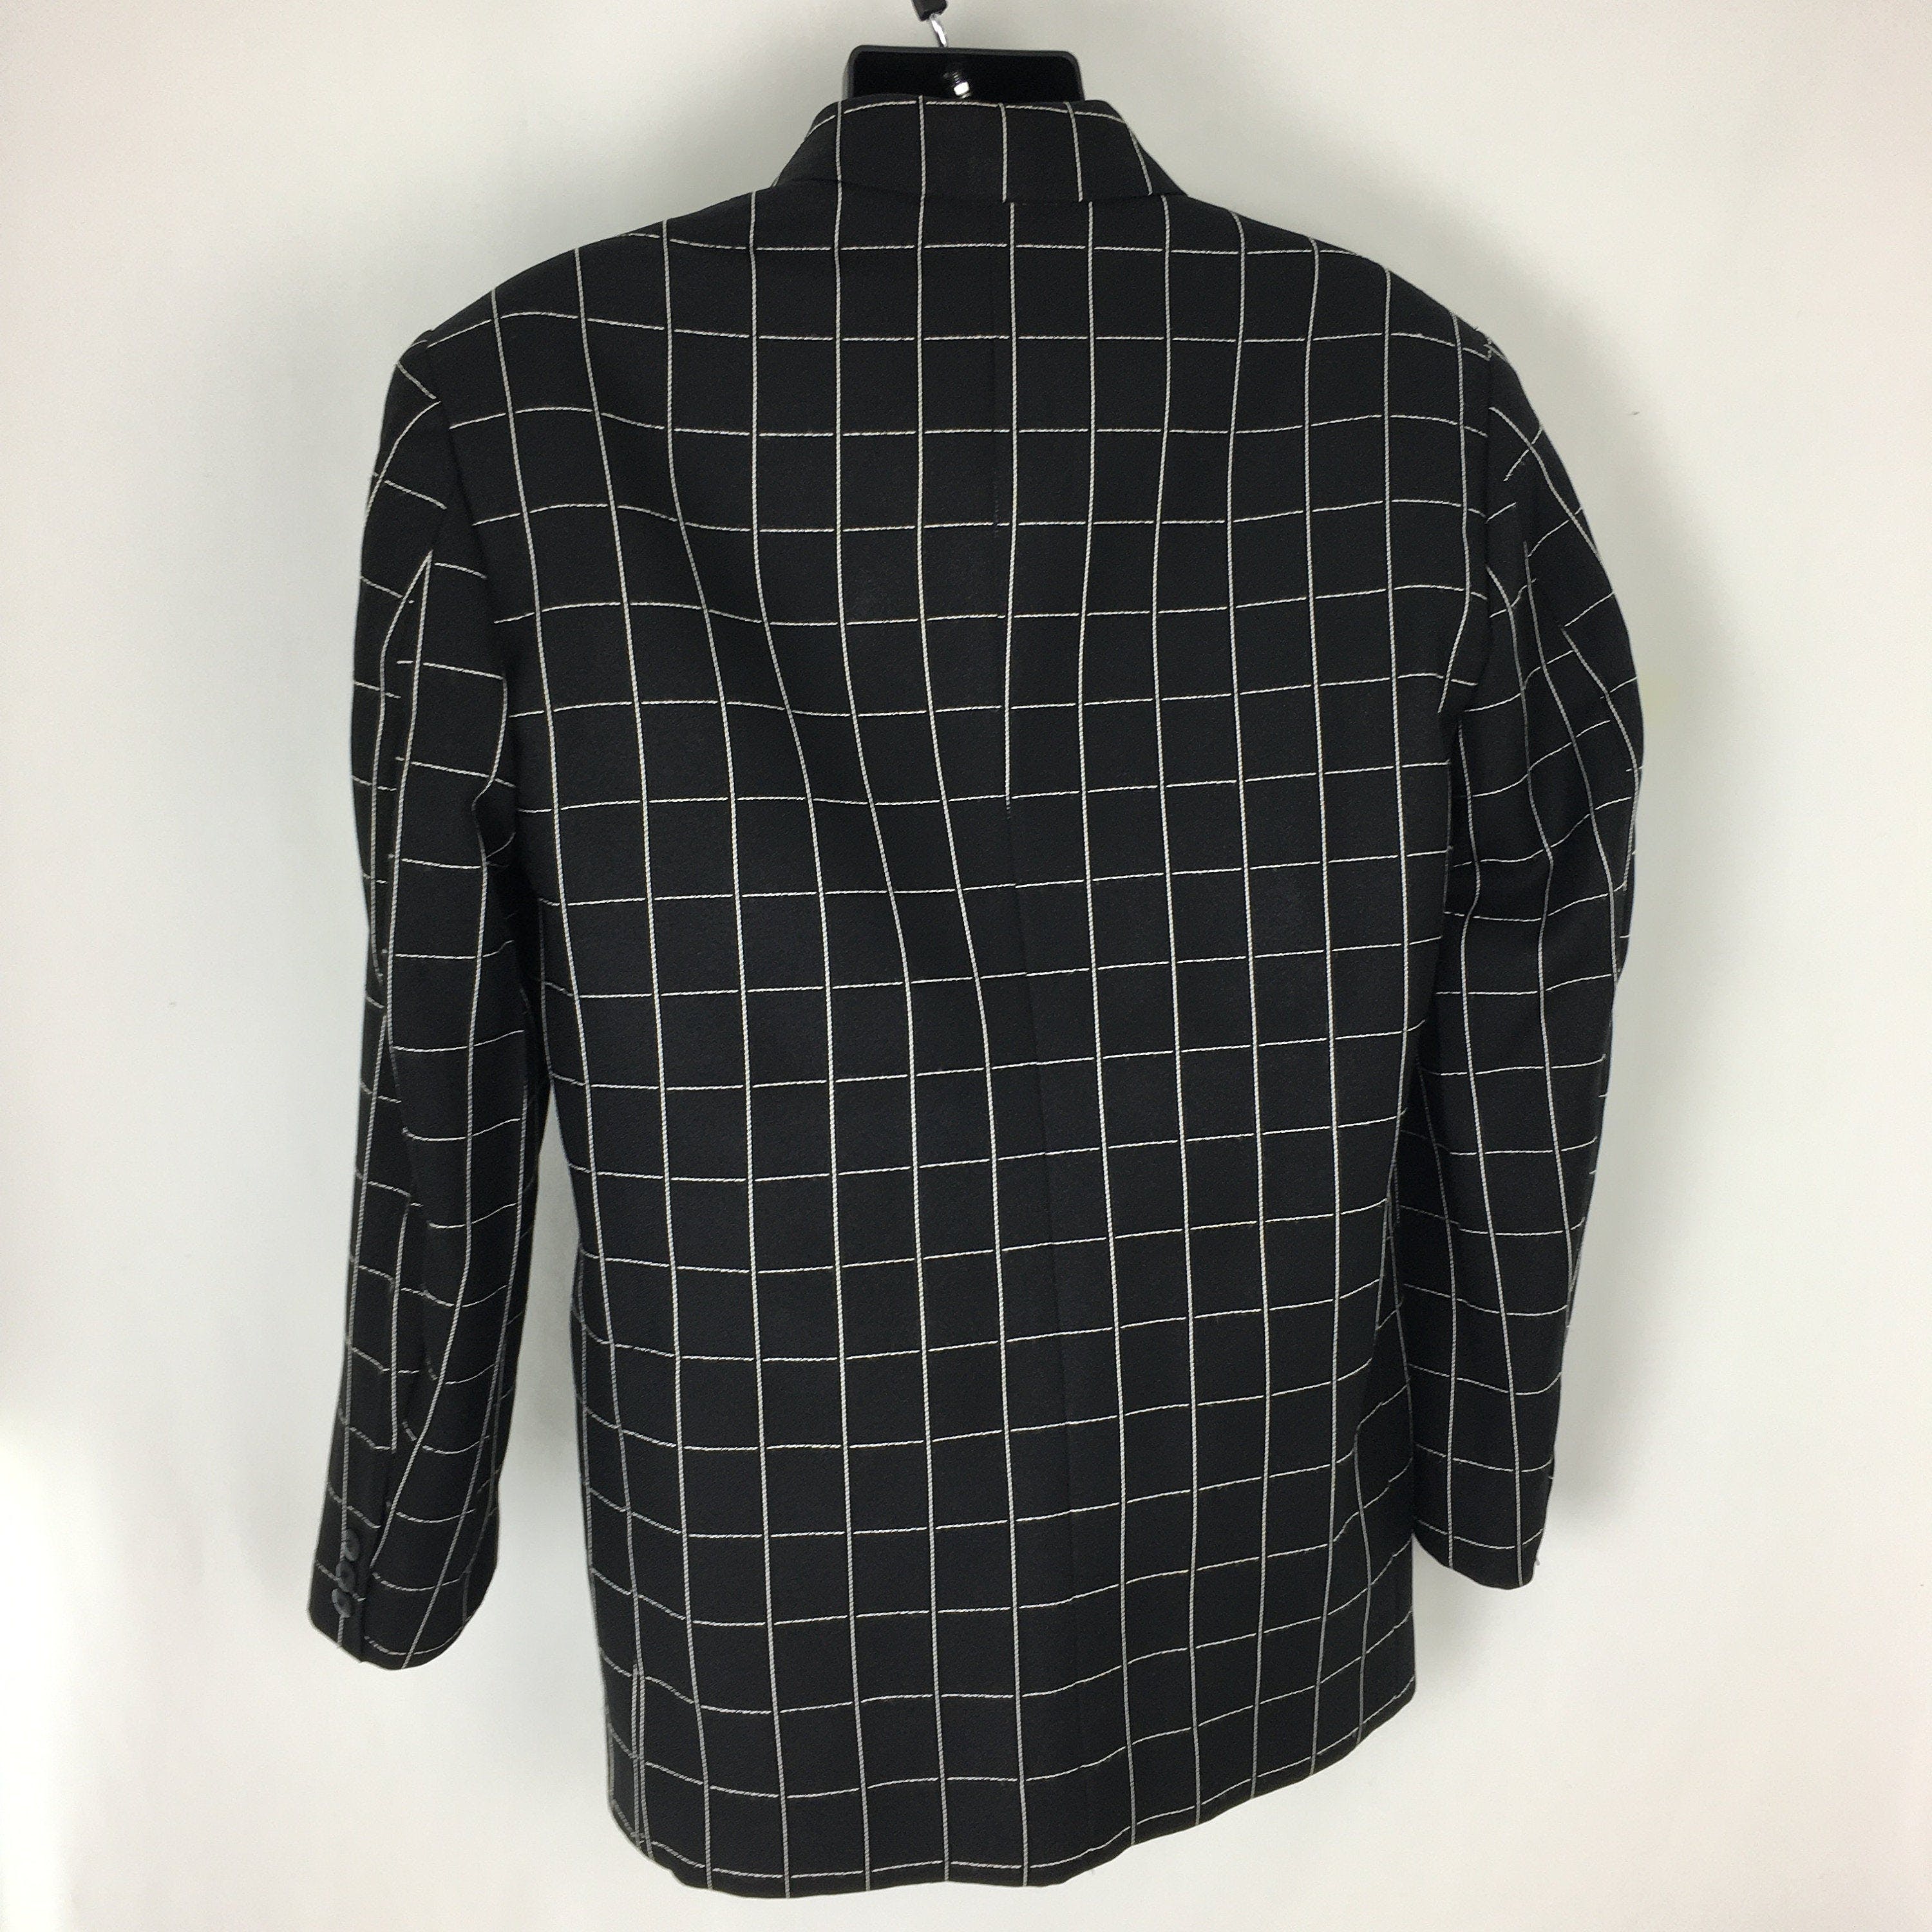 Vintage 90's Men's Black and White Windowpane Sports Coat by Officer ...